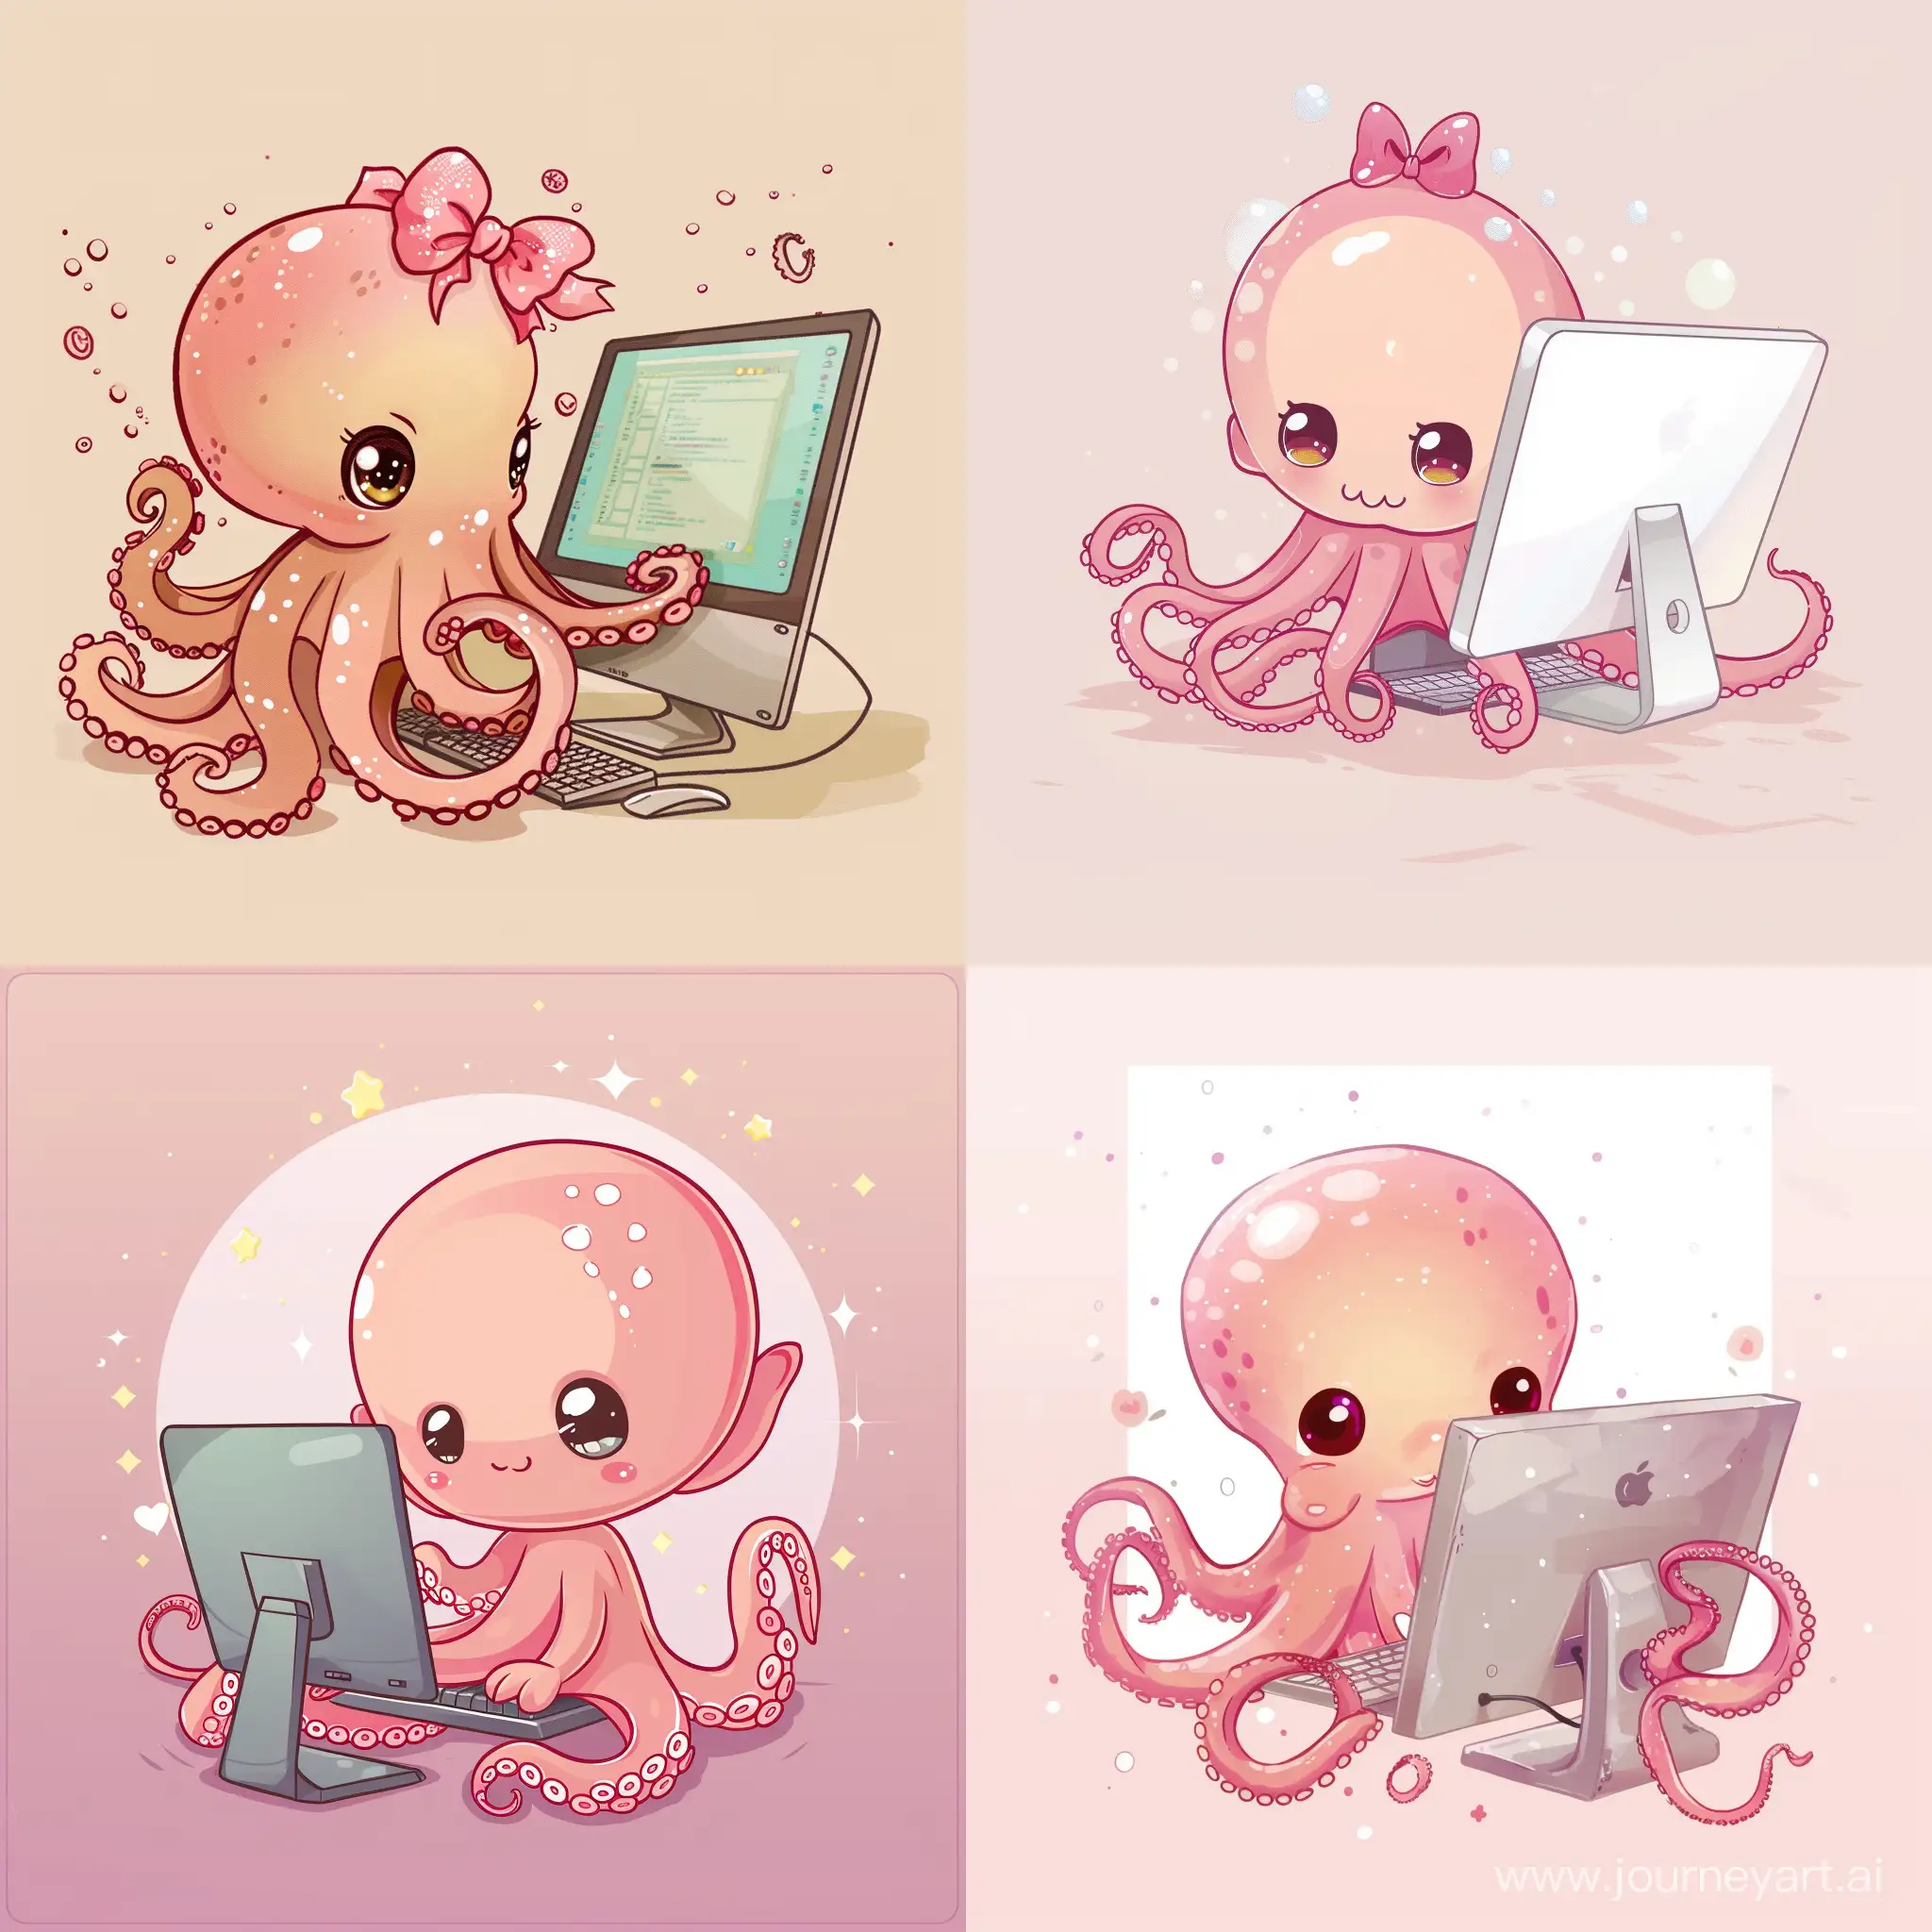 Adorable-Kawaii-Octopus-Engaged-in-Computer-Work